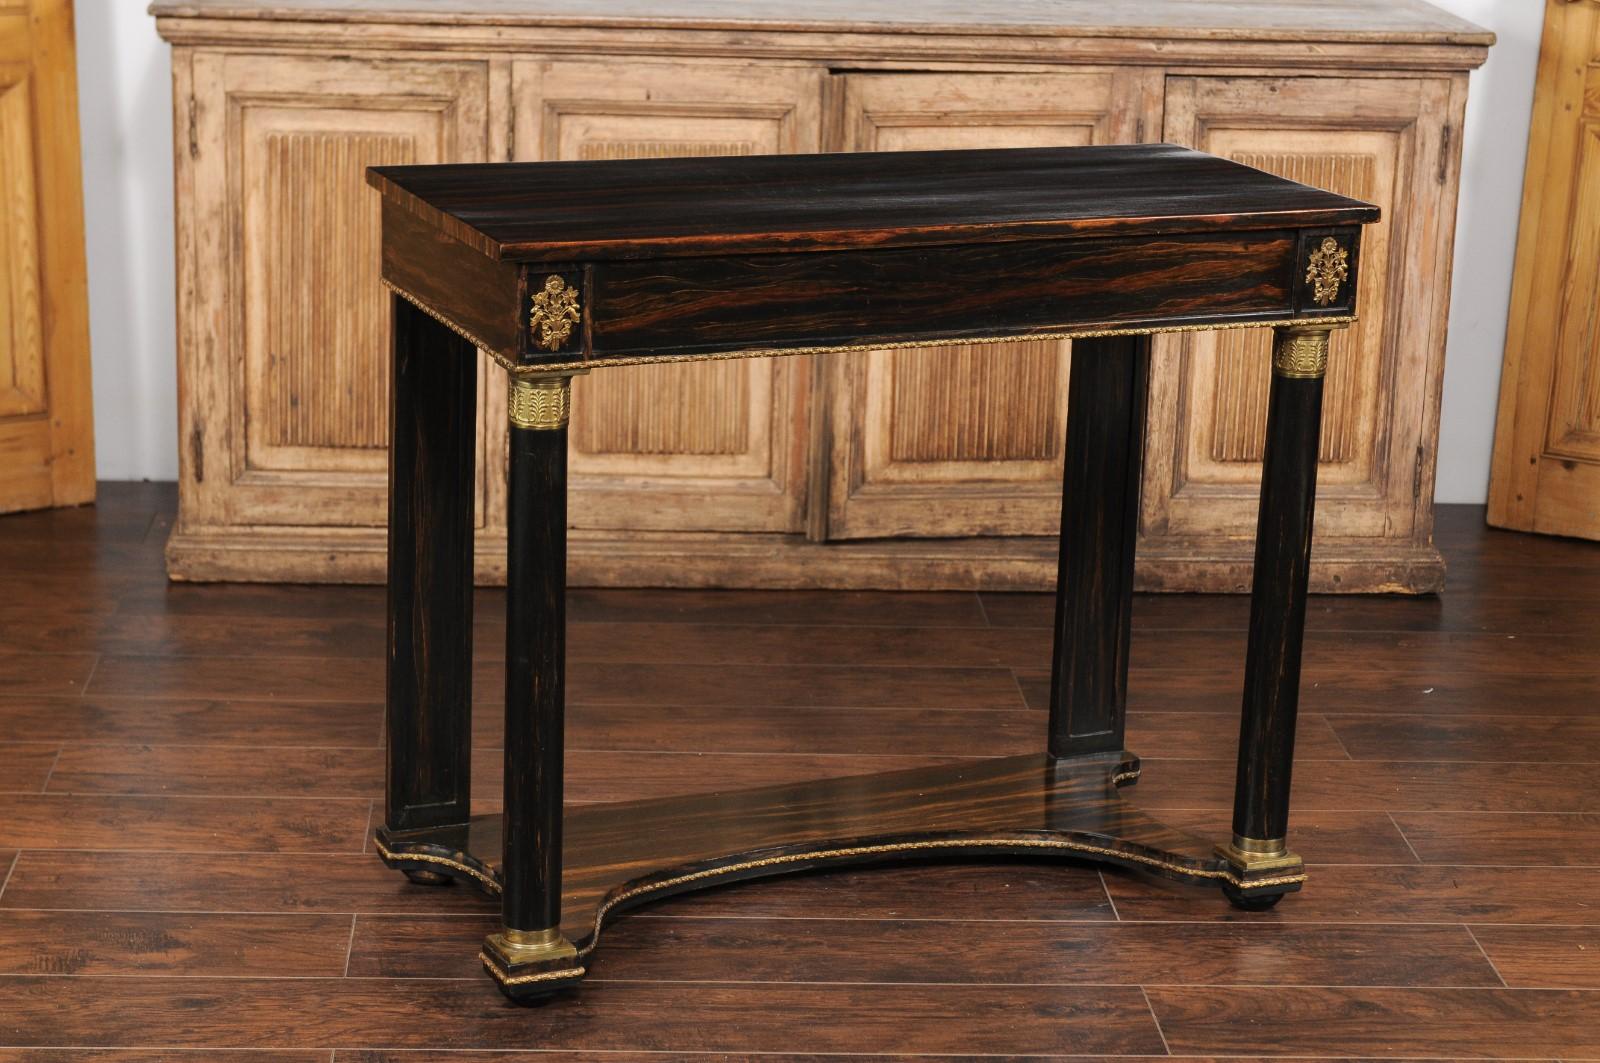 An English Regency style faux-painted rosewood console table from the mid-19th century, with bronze mounts and lower shelf. Born in England during the 1850s, this elegant console table features a rectangular top sitting above a lovely apron, adorned